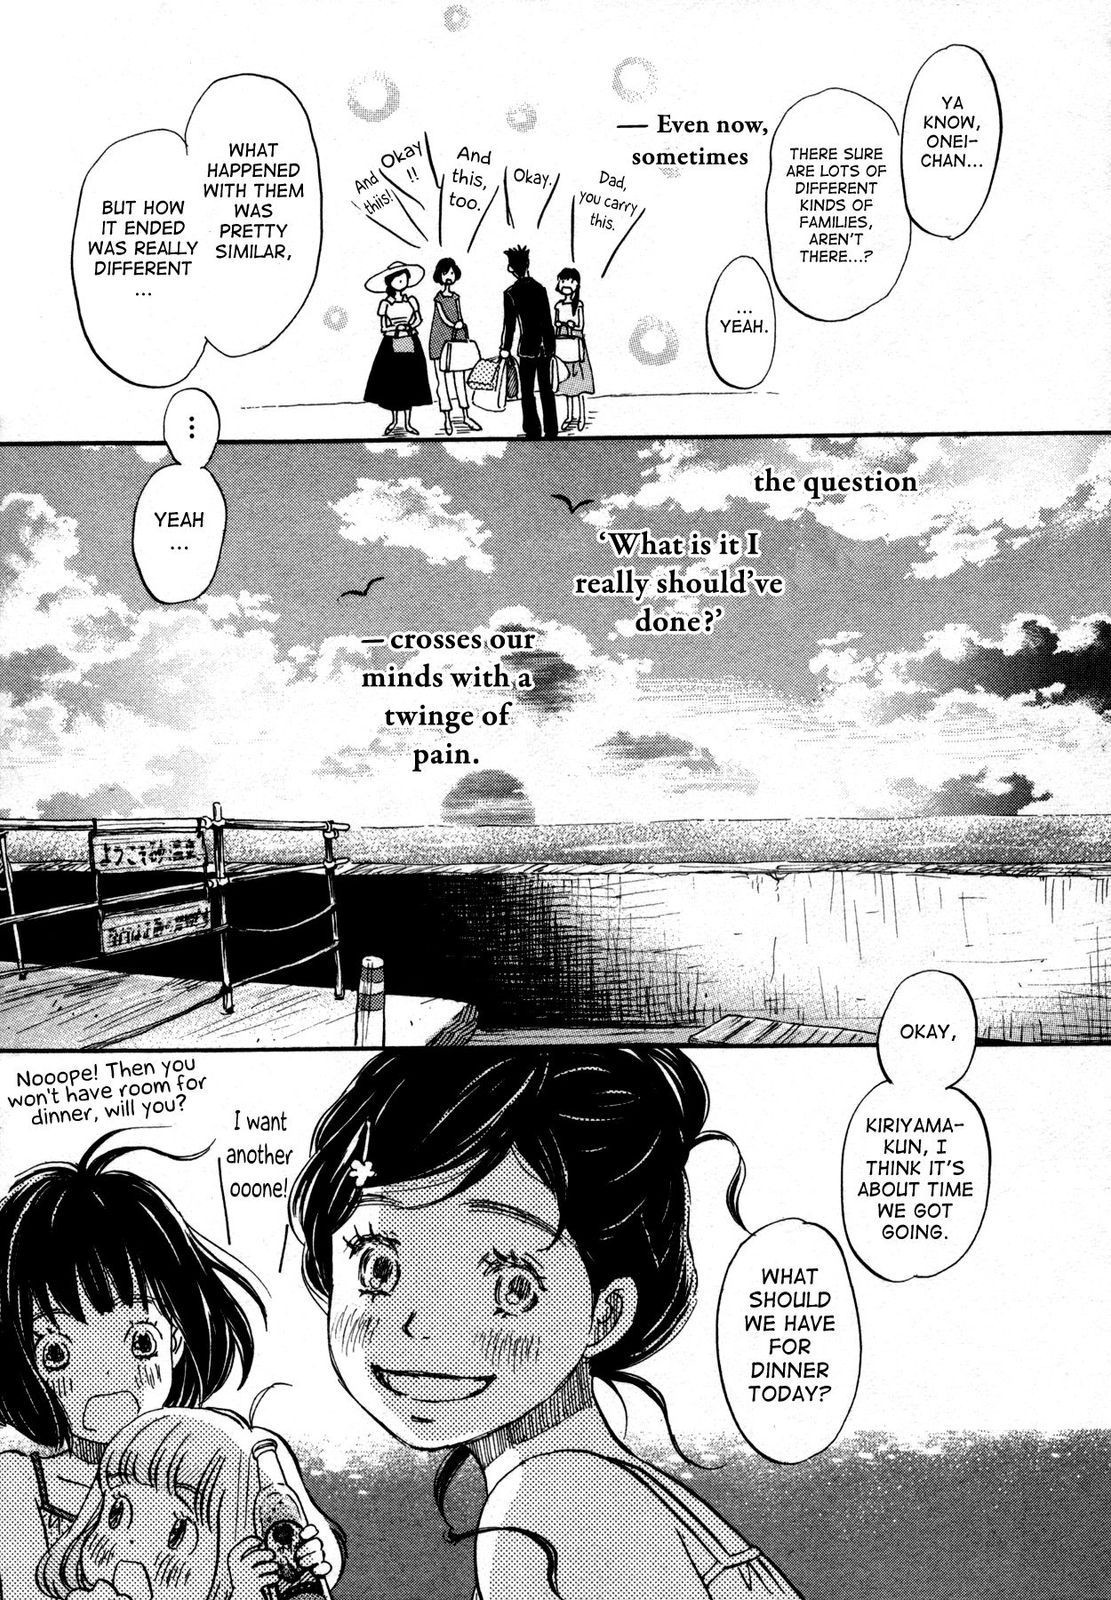 March Comes in Like a Lion, Chapter 120 The Satsuma Arc (Part 4) (EN) image 09